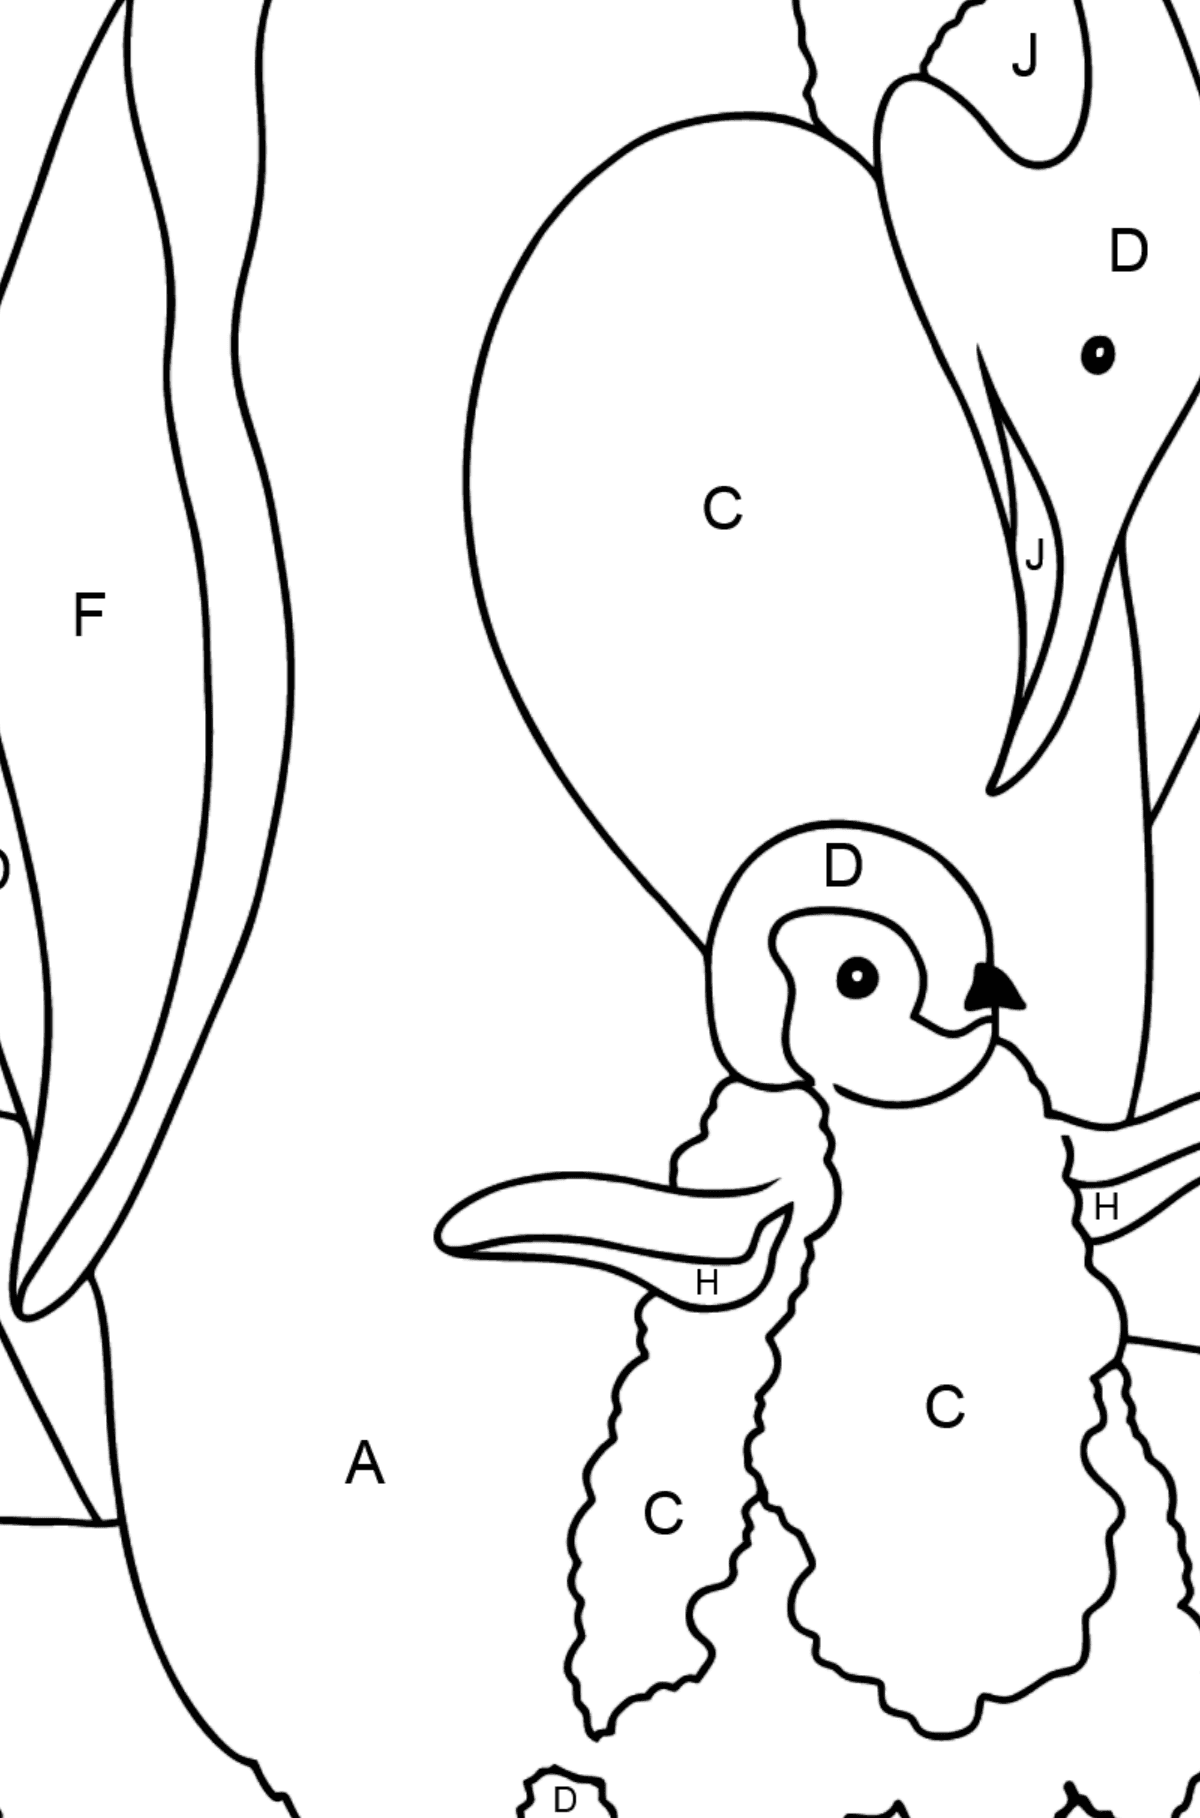 Coloring Page - A Penguin with a Baby - Coloring by Letters for Kids